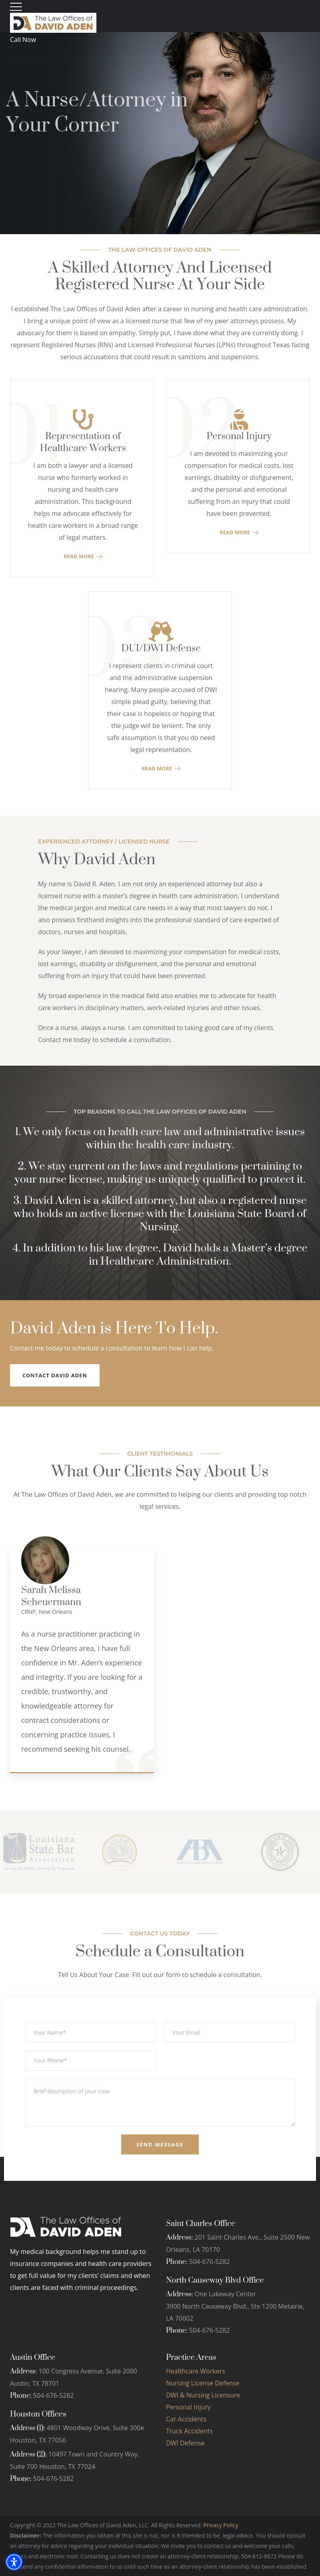 The Law Offices of David Aden - New Orleans LA Lawyers